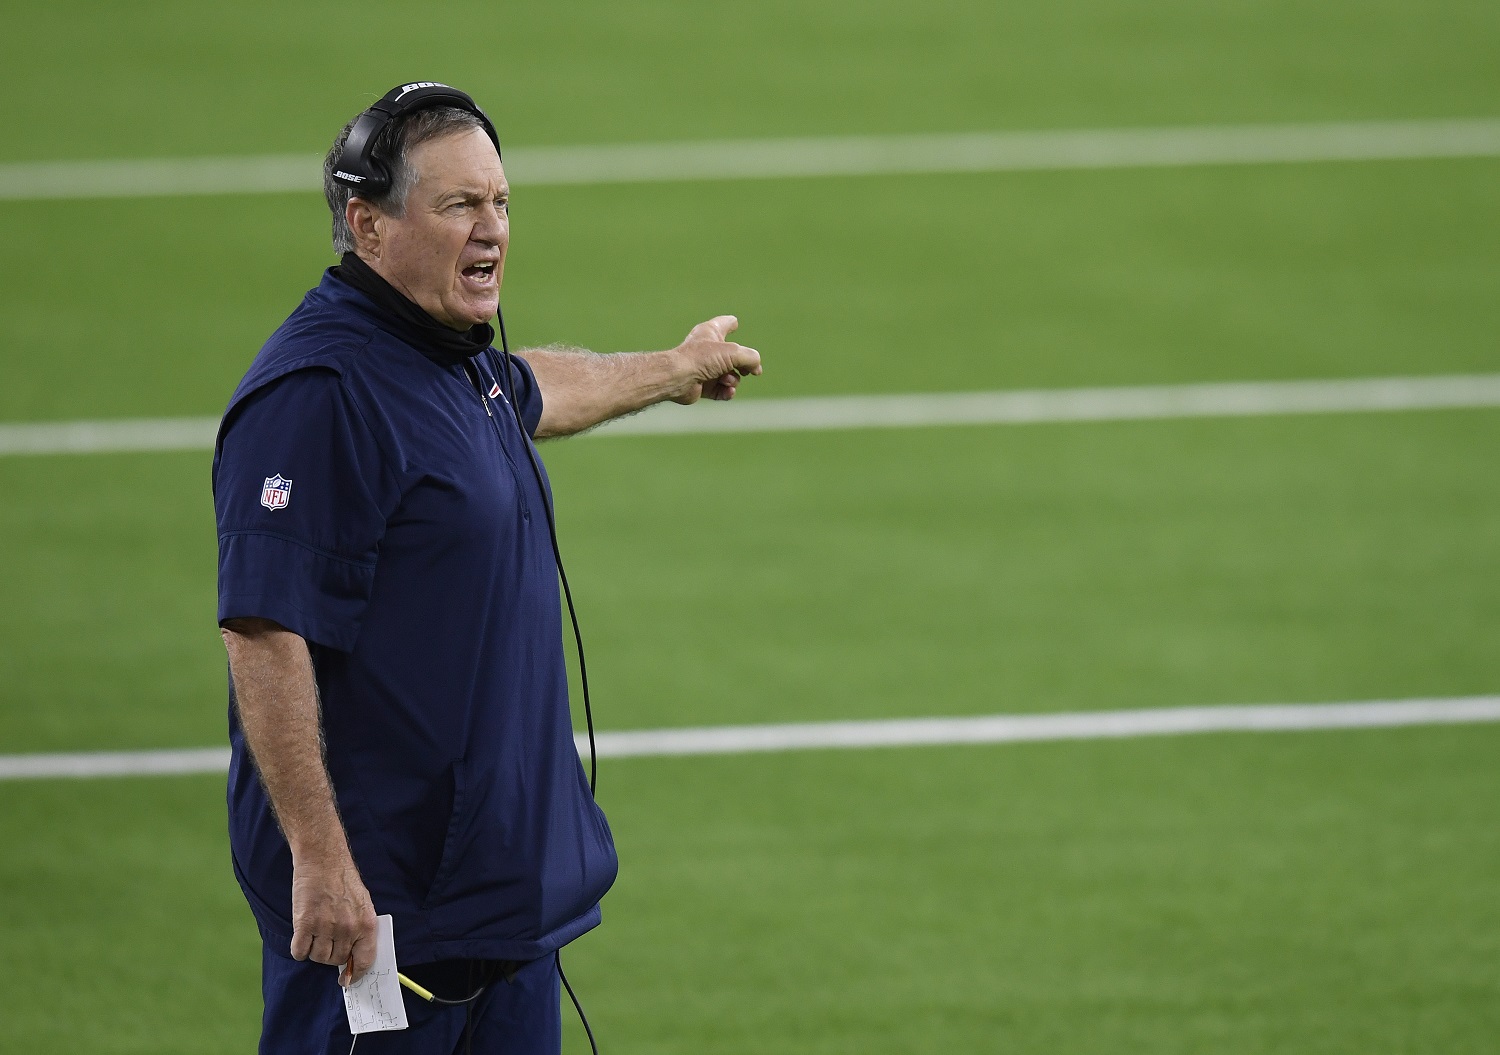 New England Patriots coach Bill Belichick complains to officials during a 24-3 loss to the Los Angeles Rams on Dec. 10, 2020, in Inglewood, California. | Photo by Harry How/Getty Images